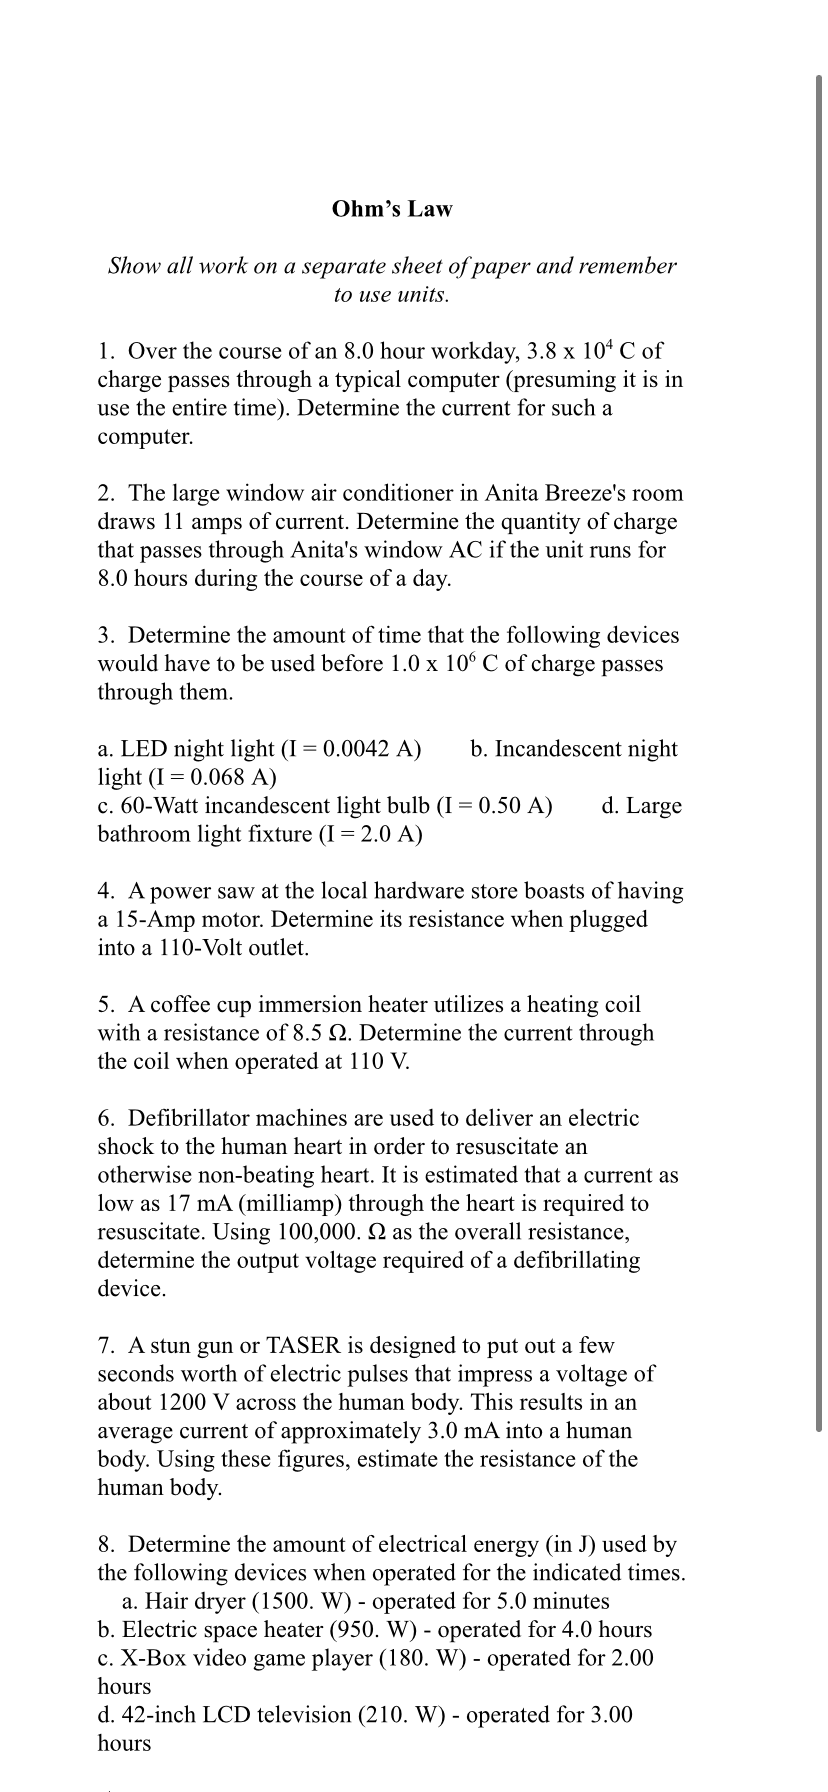 Ohm's Law
Show all work on a separate sheet of paper and remember
to use units.
1. Over the course of an 8.0 hour workday, 3.8 x 104 C of
charge passes through a typical computer (presuming it is in
use the entire time). Determine the current for such a
computer.
2. The large window air conditioner in Anita Breeze's room
draws 11 amps of current. Determine the quantity of charge
that passes through Anita's window AC if the unit runs for
8.0 hours during the course of a day.
3. Determine the amount of time that the following devices
would have to be used before 1.0 x 10° C of charge passes
through them.
b. Incandescent night
a. LED night light (I = 0.0042 A)
light (I = 0.068 A)
c. 60-Watt incandescent light bulb (I = 0.50 A)
bathroom light fixture (I = 2.0 A)
d. Large
4. A power saw at the local hardware store boasts of having
a 15-Amp motor. Determine its resistance when plugged
into a 110-Volt outlet.
5. A coffee cup immersion heater utilizes a heating coil
with a resistance of 8.5 2. Determine the current through
the coil when operated at 110 V.
6. Defibrillator machines are used to deliver an electric
shock to the human heart in order to resuscitate an
otherwise non-beating heart. It is estimated that a current as
low as 17 mA (milliamp) through the heart is required to
resuscitate. Using 100,000. 2 as the overall resistance,
determine the output voltage required of a defibrillating
device.
7. A stun gun or TASER is designed to put out a few
seconds worth of electric pulses that impress a voltage of
about 1200 V across the human body. This results in an
average current of approximately 3.0 mA into a human
body. Using these figures, estimate the resistance of the
human body.
8. Determine the amount of electrical energy (in J) used by
the following devices when operated for the indicated times.
a. Hair dryer (1500. W) - operated for 5.0 minutes
b. Electric space heater (950. W) - operated for 4.0 hours
c. X-Box video game player (180. W) - operated for 2.00
hours
d. 42-inch LCD television (210. W) - operated for 3.00
hours
